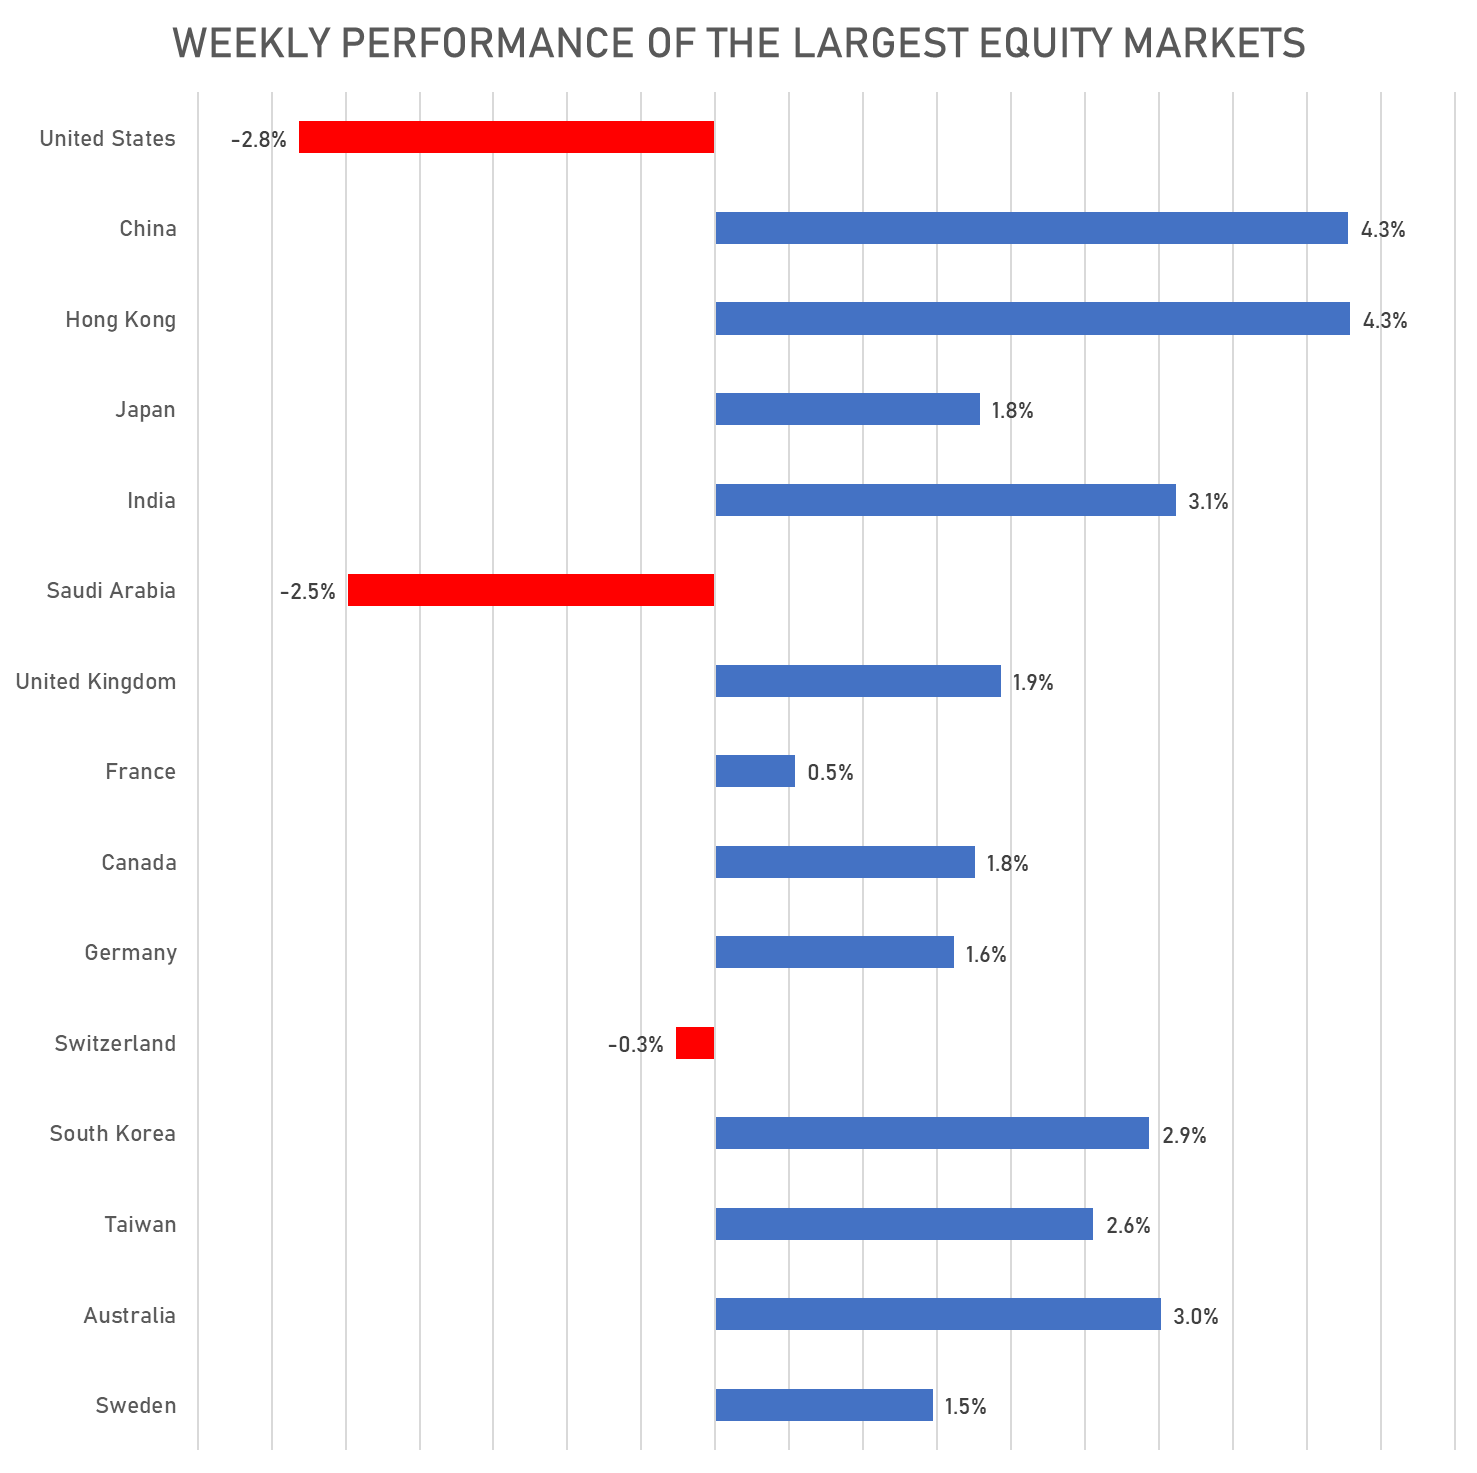 USD Total Returns For Largest Equity Markets | Sources: phipost.com, FactSet data